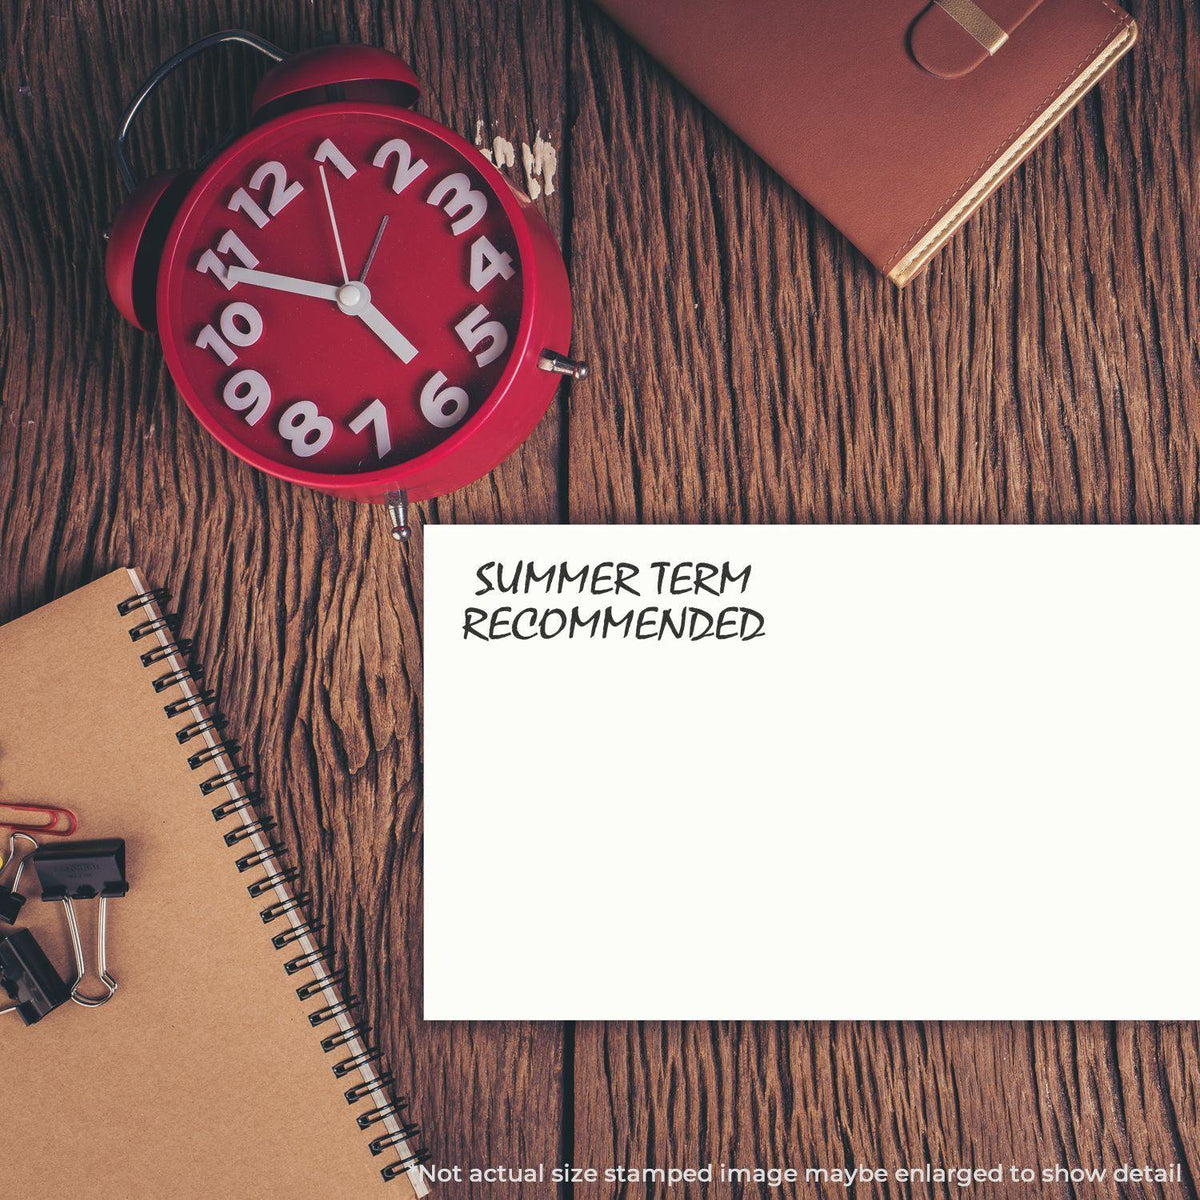 In Use Summer Term Recommended Rubber Stamp Image